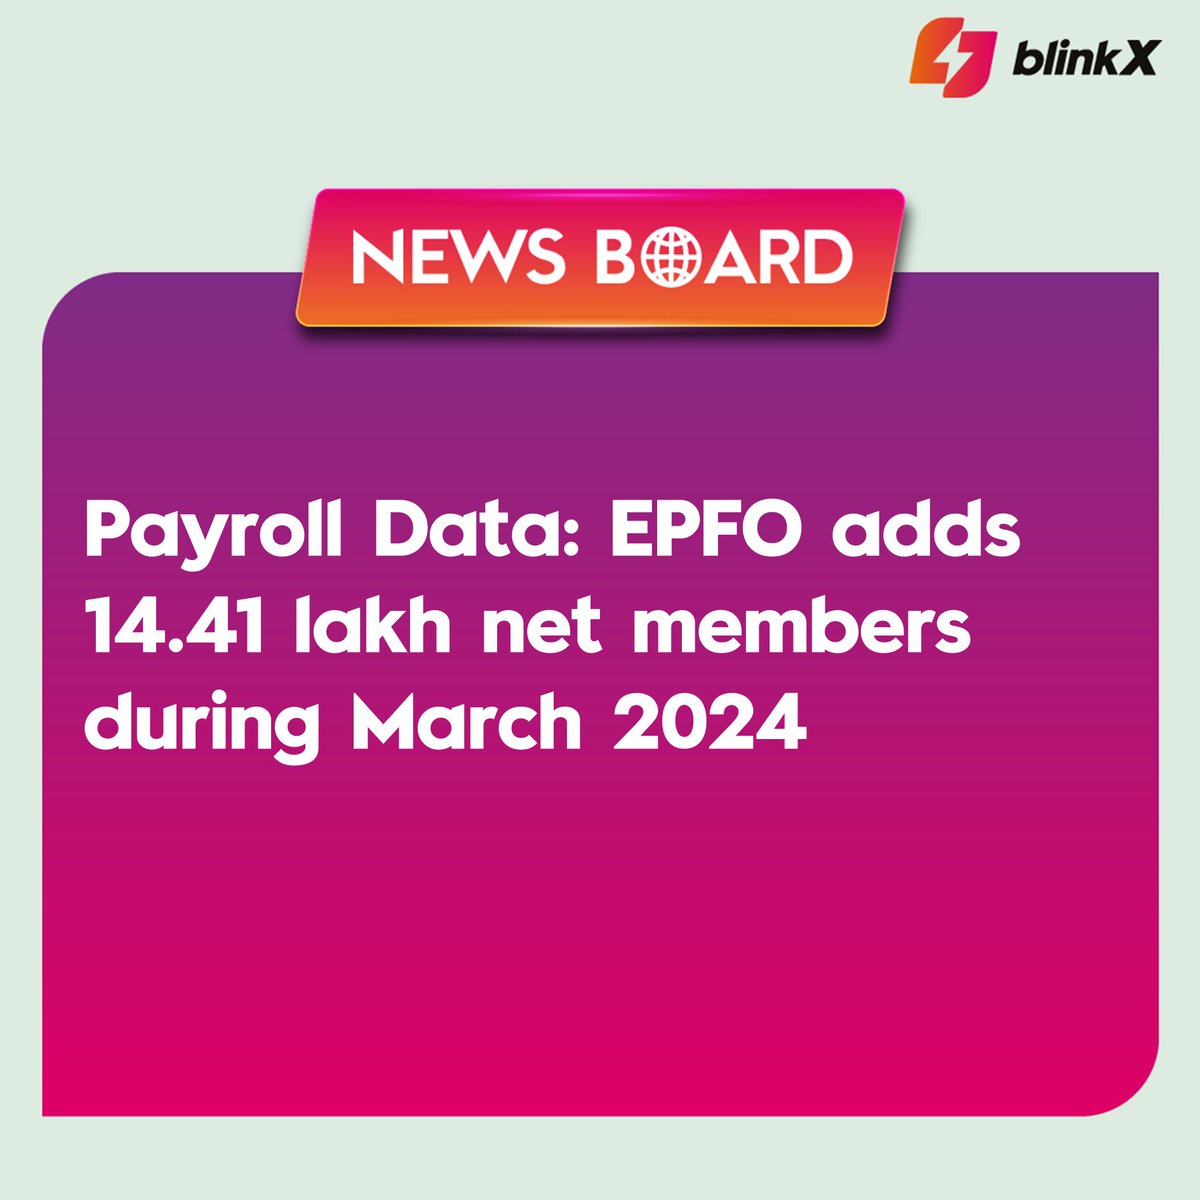 The data indicates that around 7.47 lakh new members have been enrolled during March, 2024.

#payroll #EPFO #Governmentofficials #press  #trending #news #finance #order #deal #investment #indianrailway #blinkX #getblinkX #MadeForTheMarket